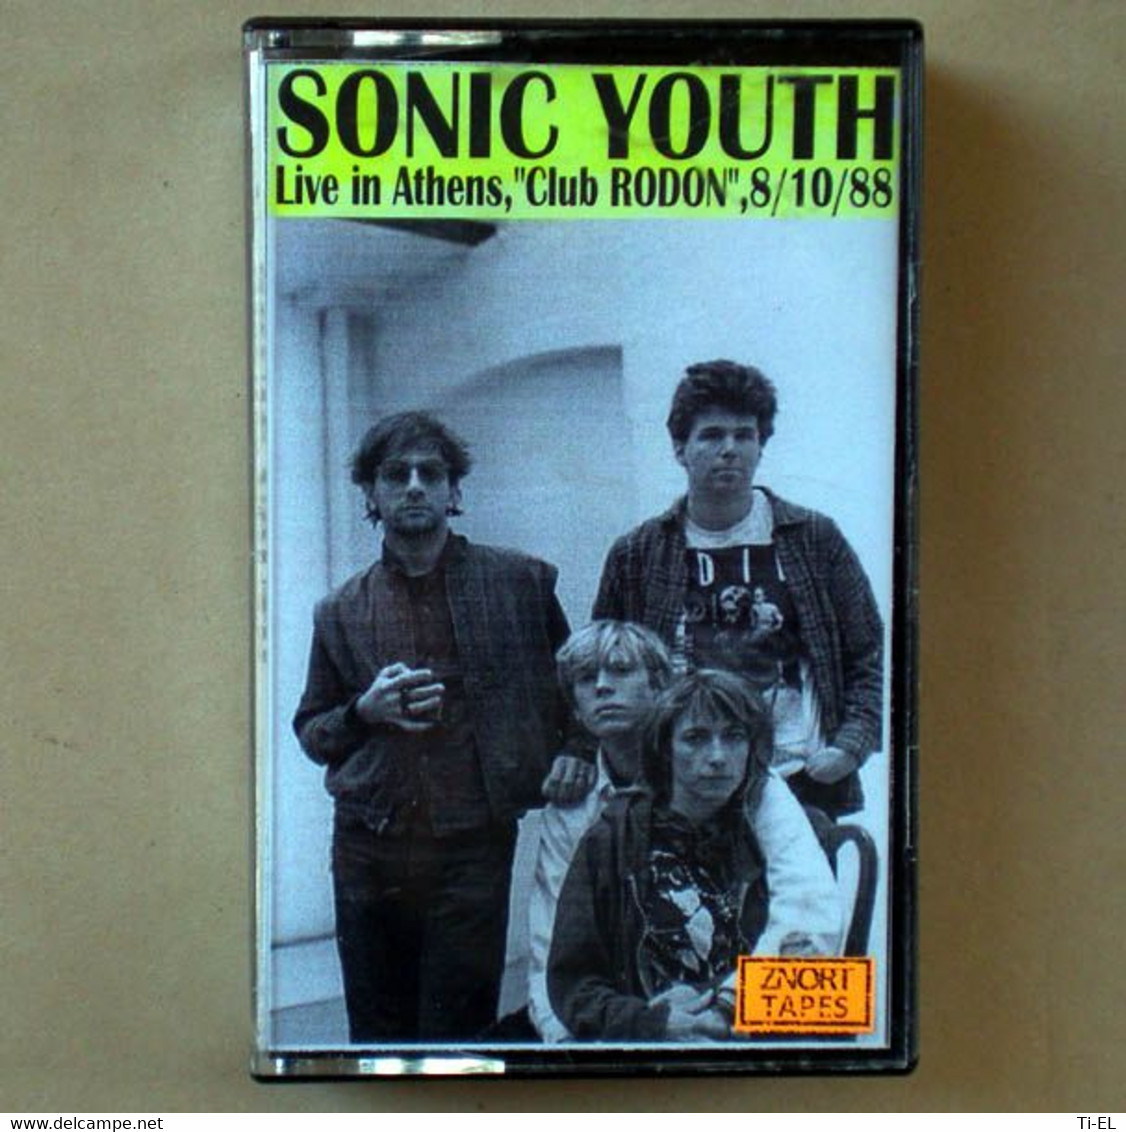 SONIC YOUTH – Live In Athens, "Club RODON", 8/10/1988 | Rare Audio Tape - Audiocassette